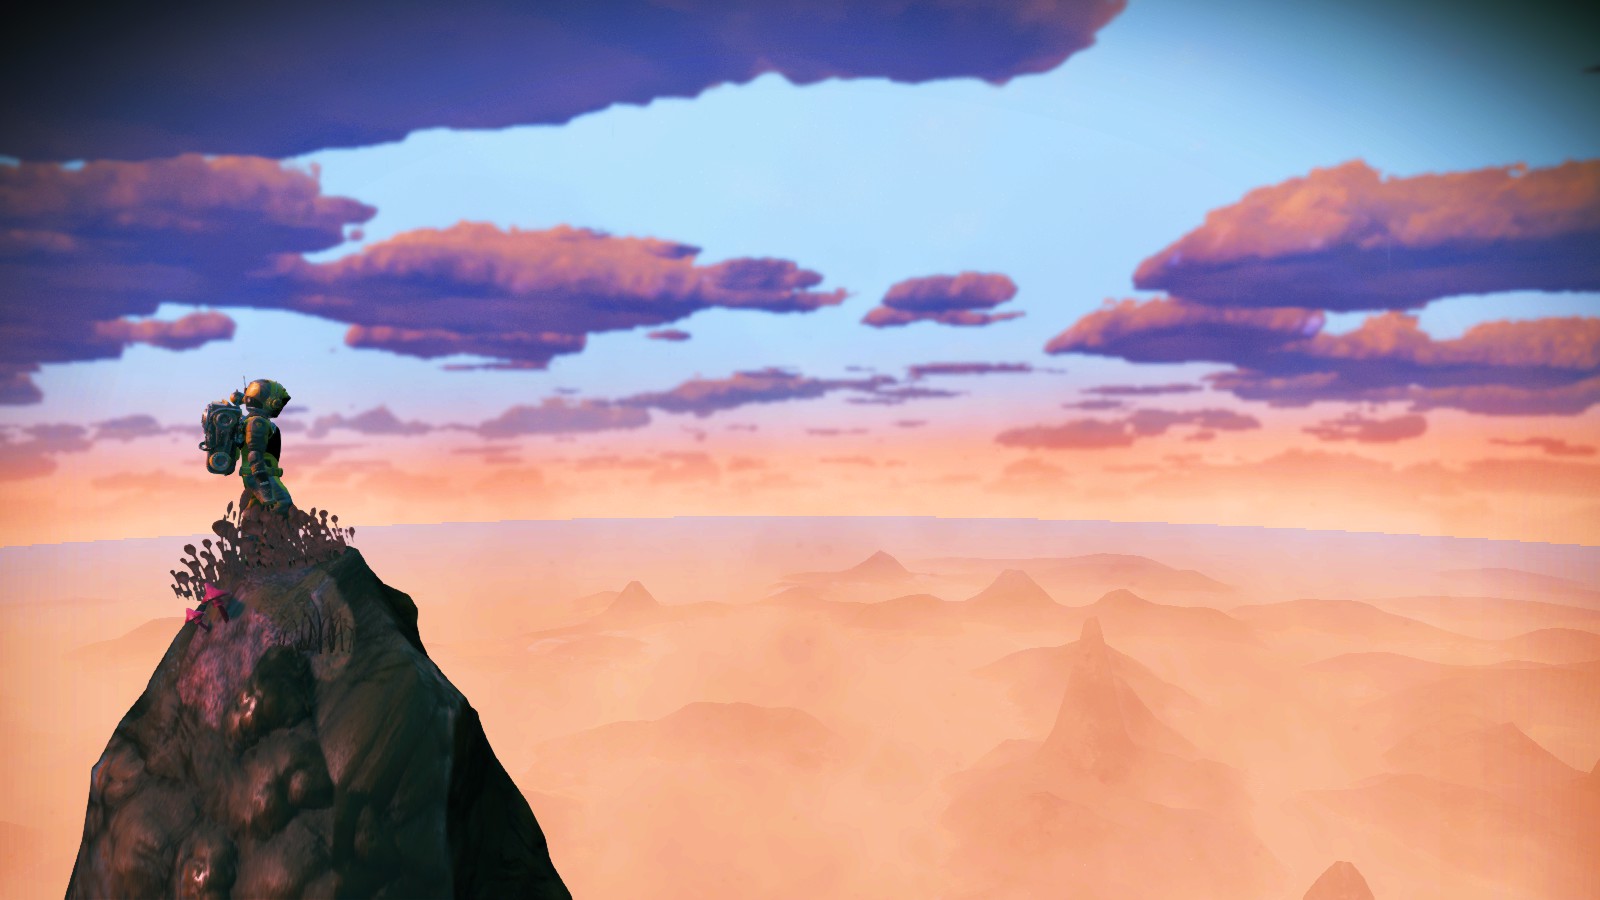 No Man's Sky, Expedition 3: Cartographers. A spacesuit-wearing traveler stands atop a very high peak, looking out over an orange-hazed planet filled with smaller peaks visible under the haze. A blue, clouded sky above.